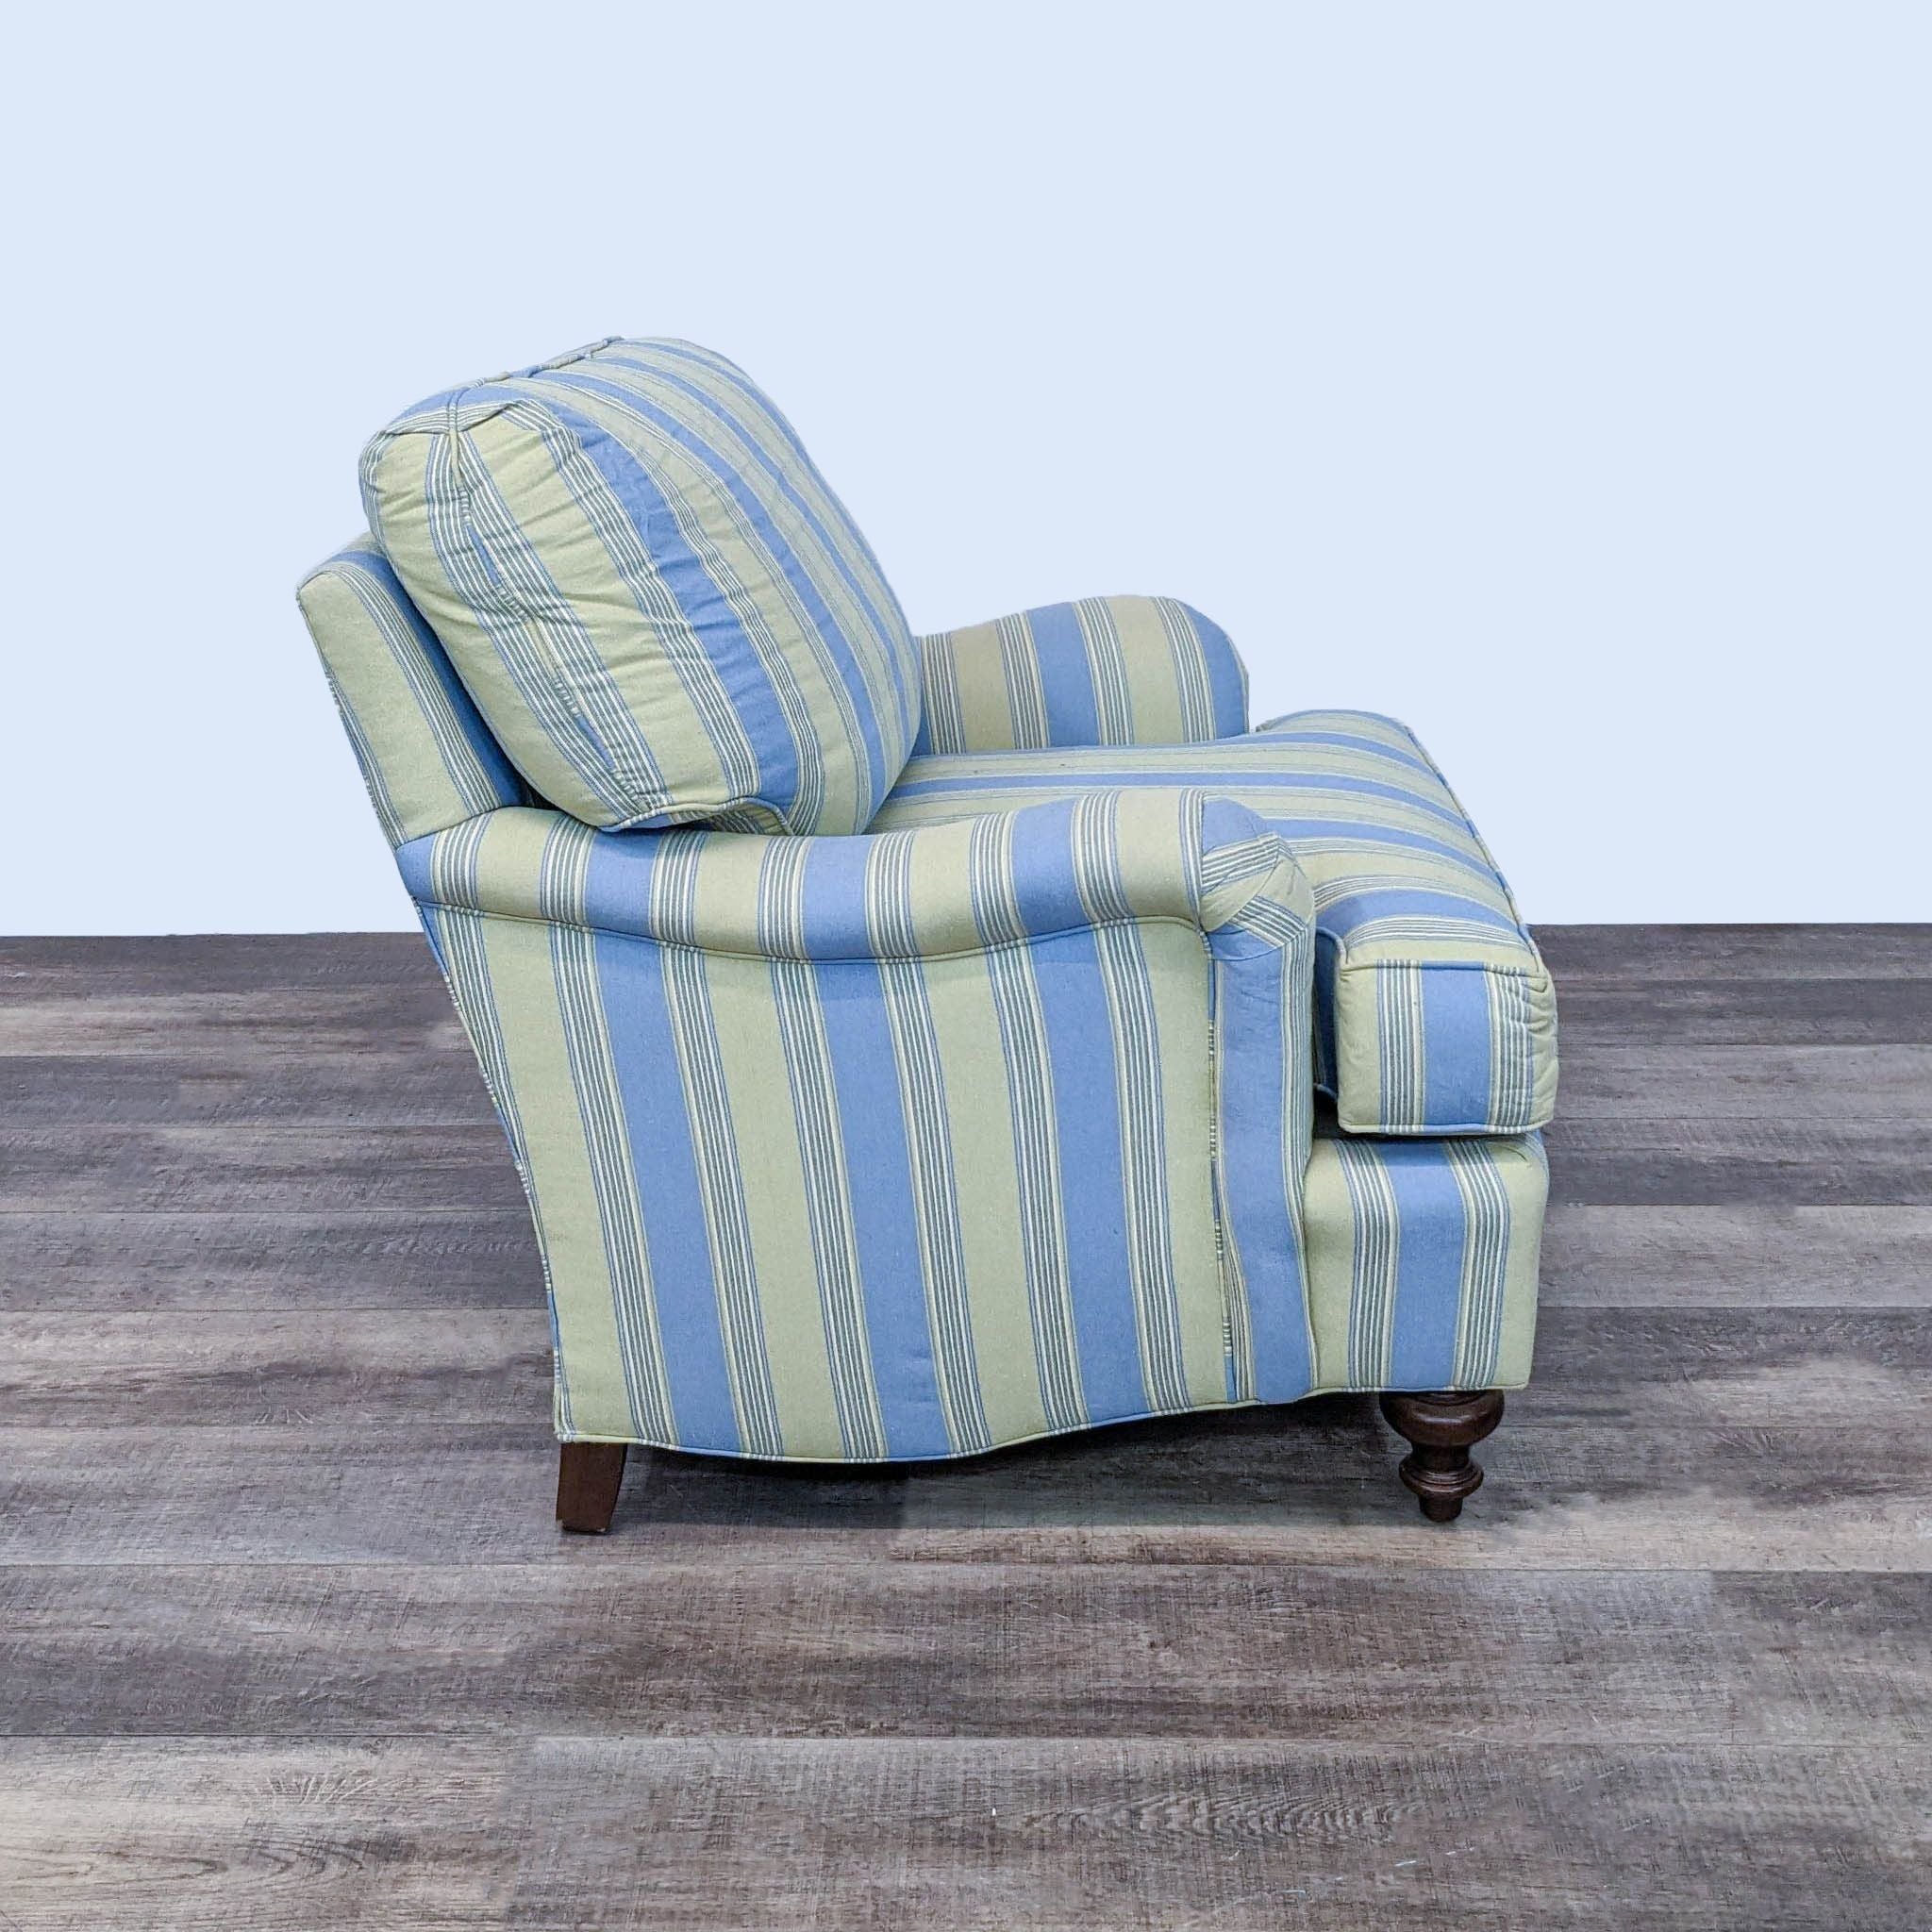 Alt text 2: Striped upholstered Taylor King chair from the Kings Road Collection showcasing comfort design with sturdy legs and soft cushioning.